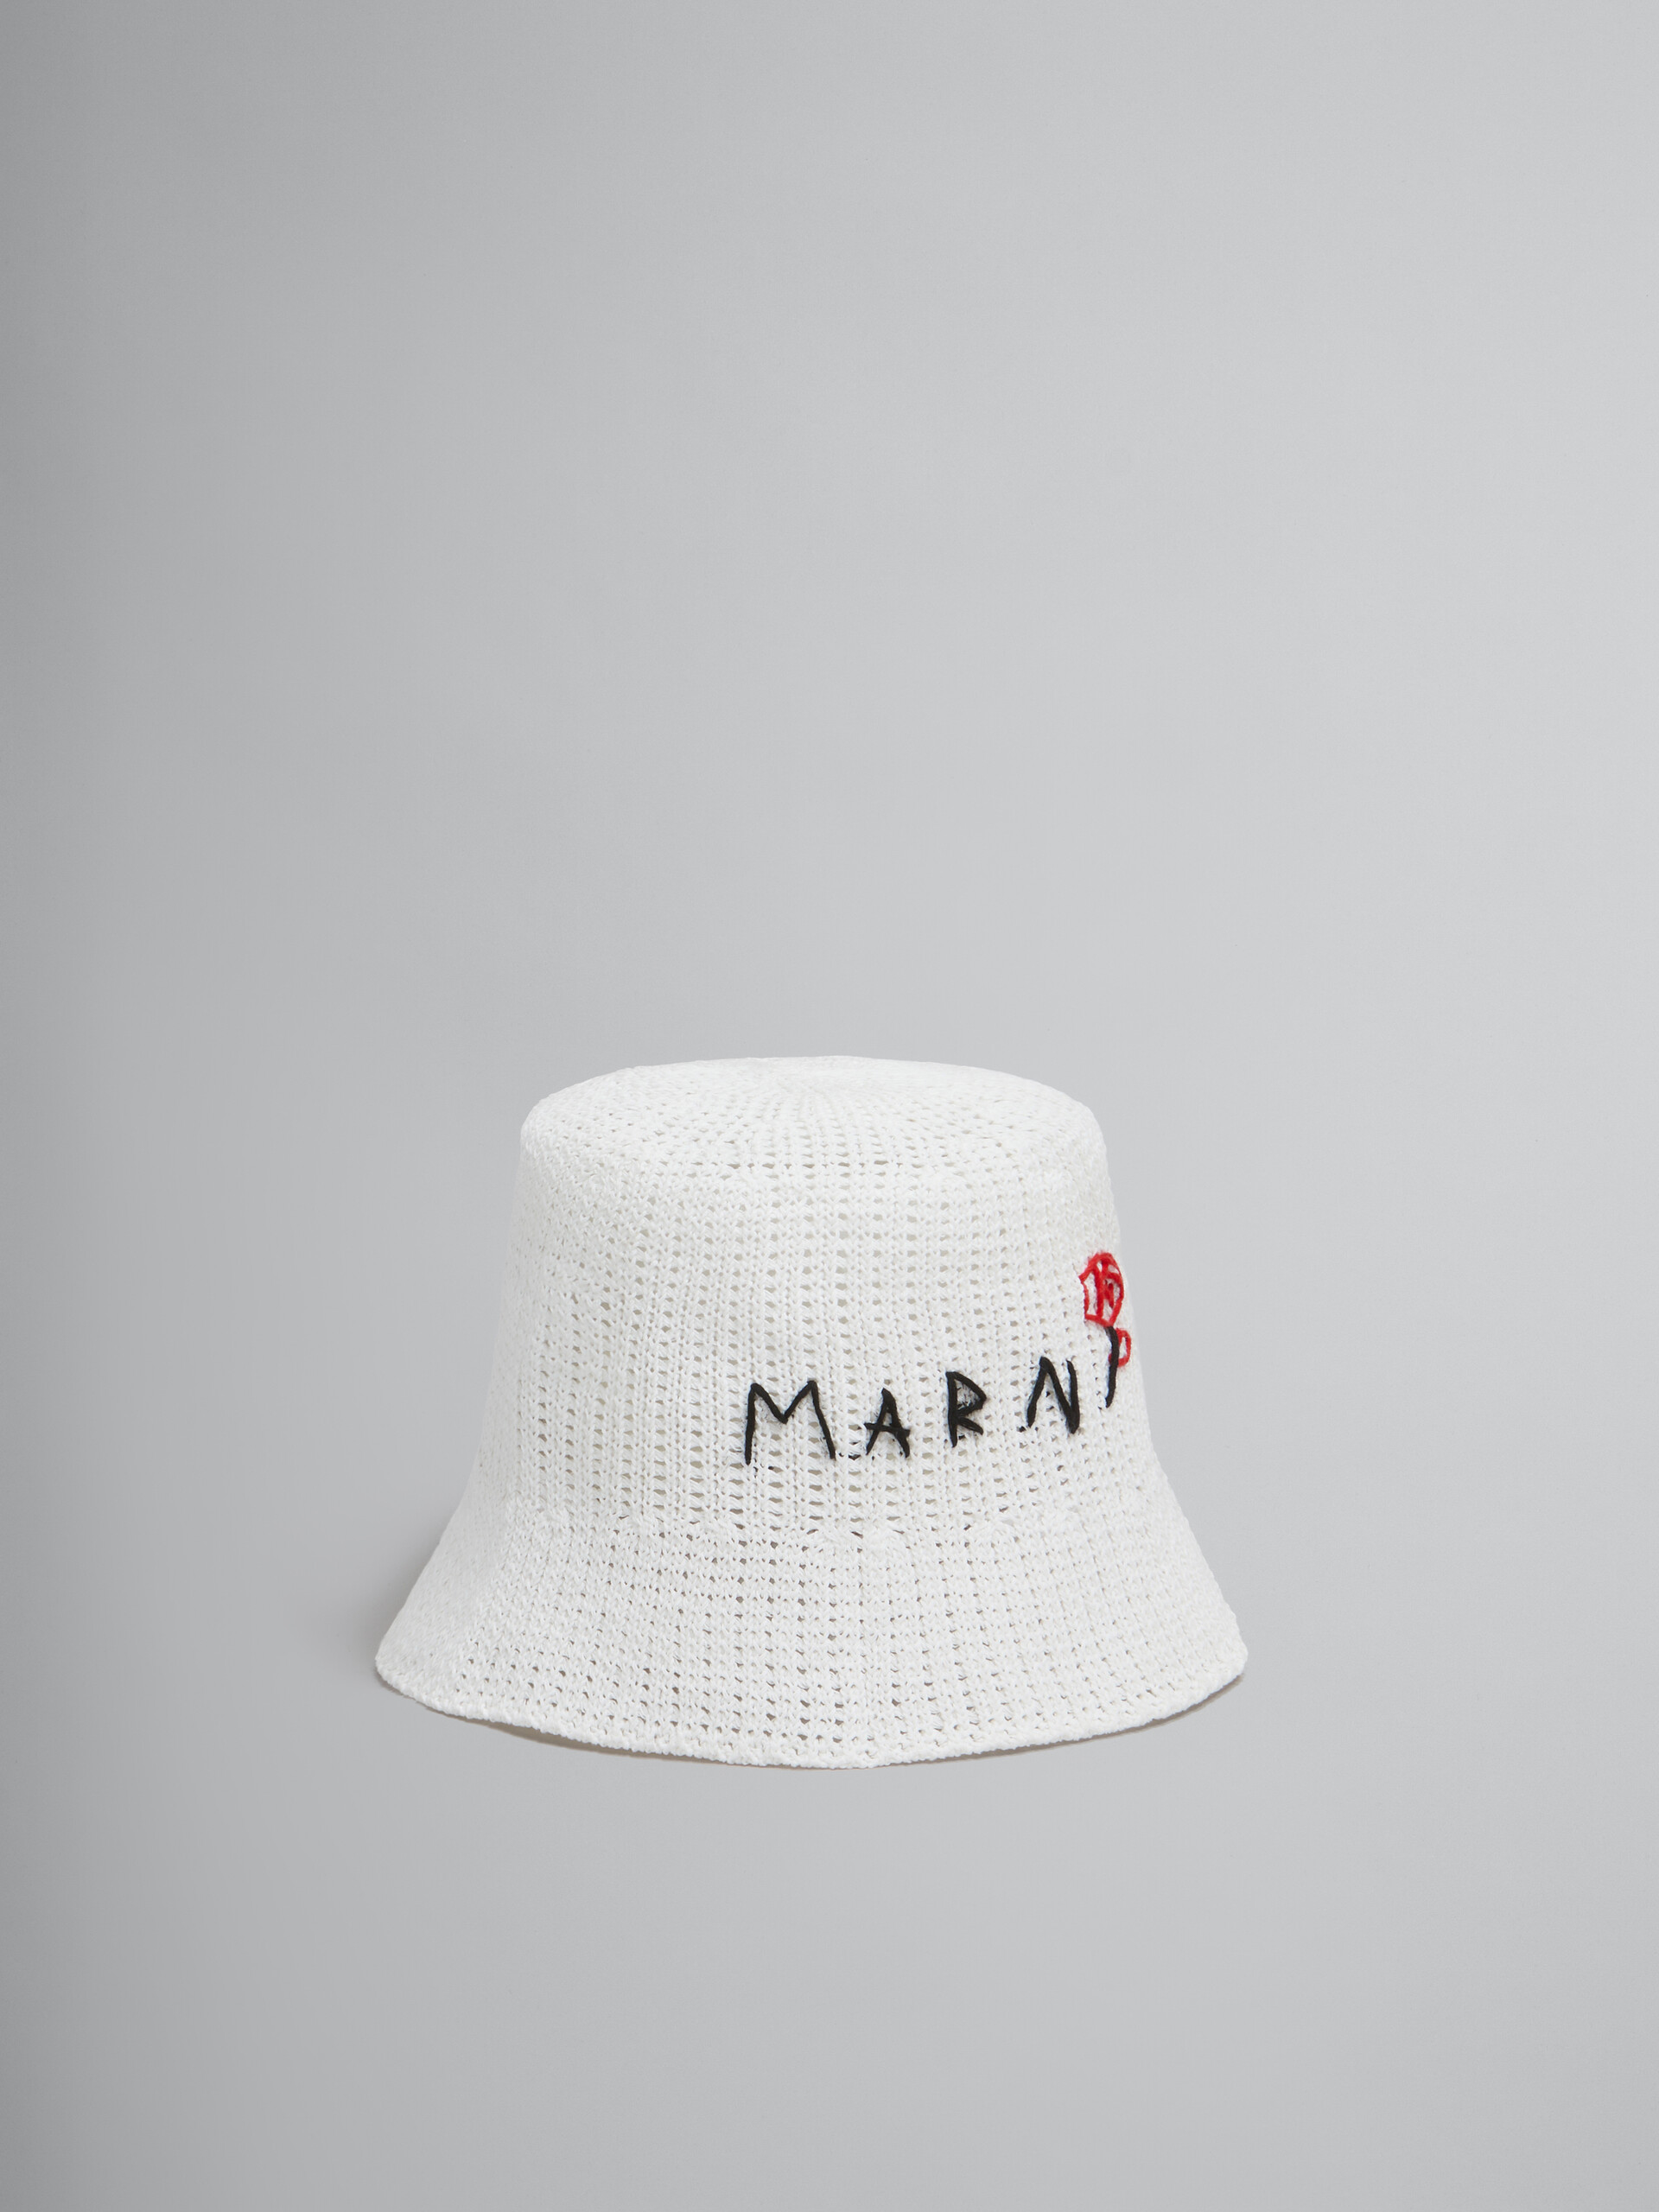 White cotton crochet hat with Marni mending - Hats - Image 1